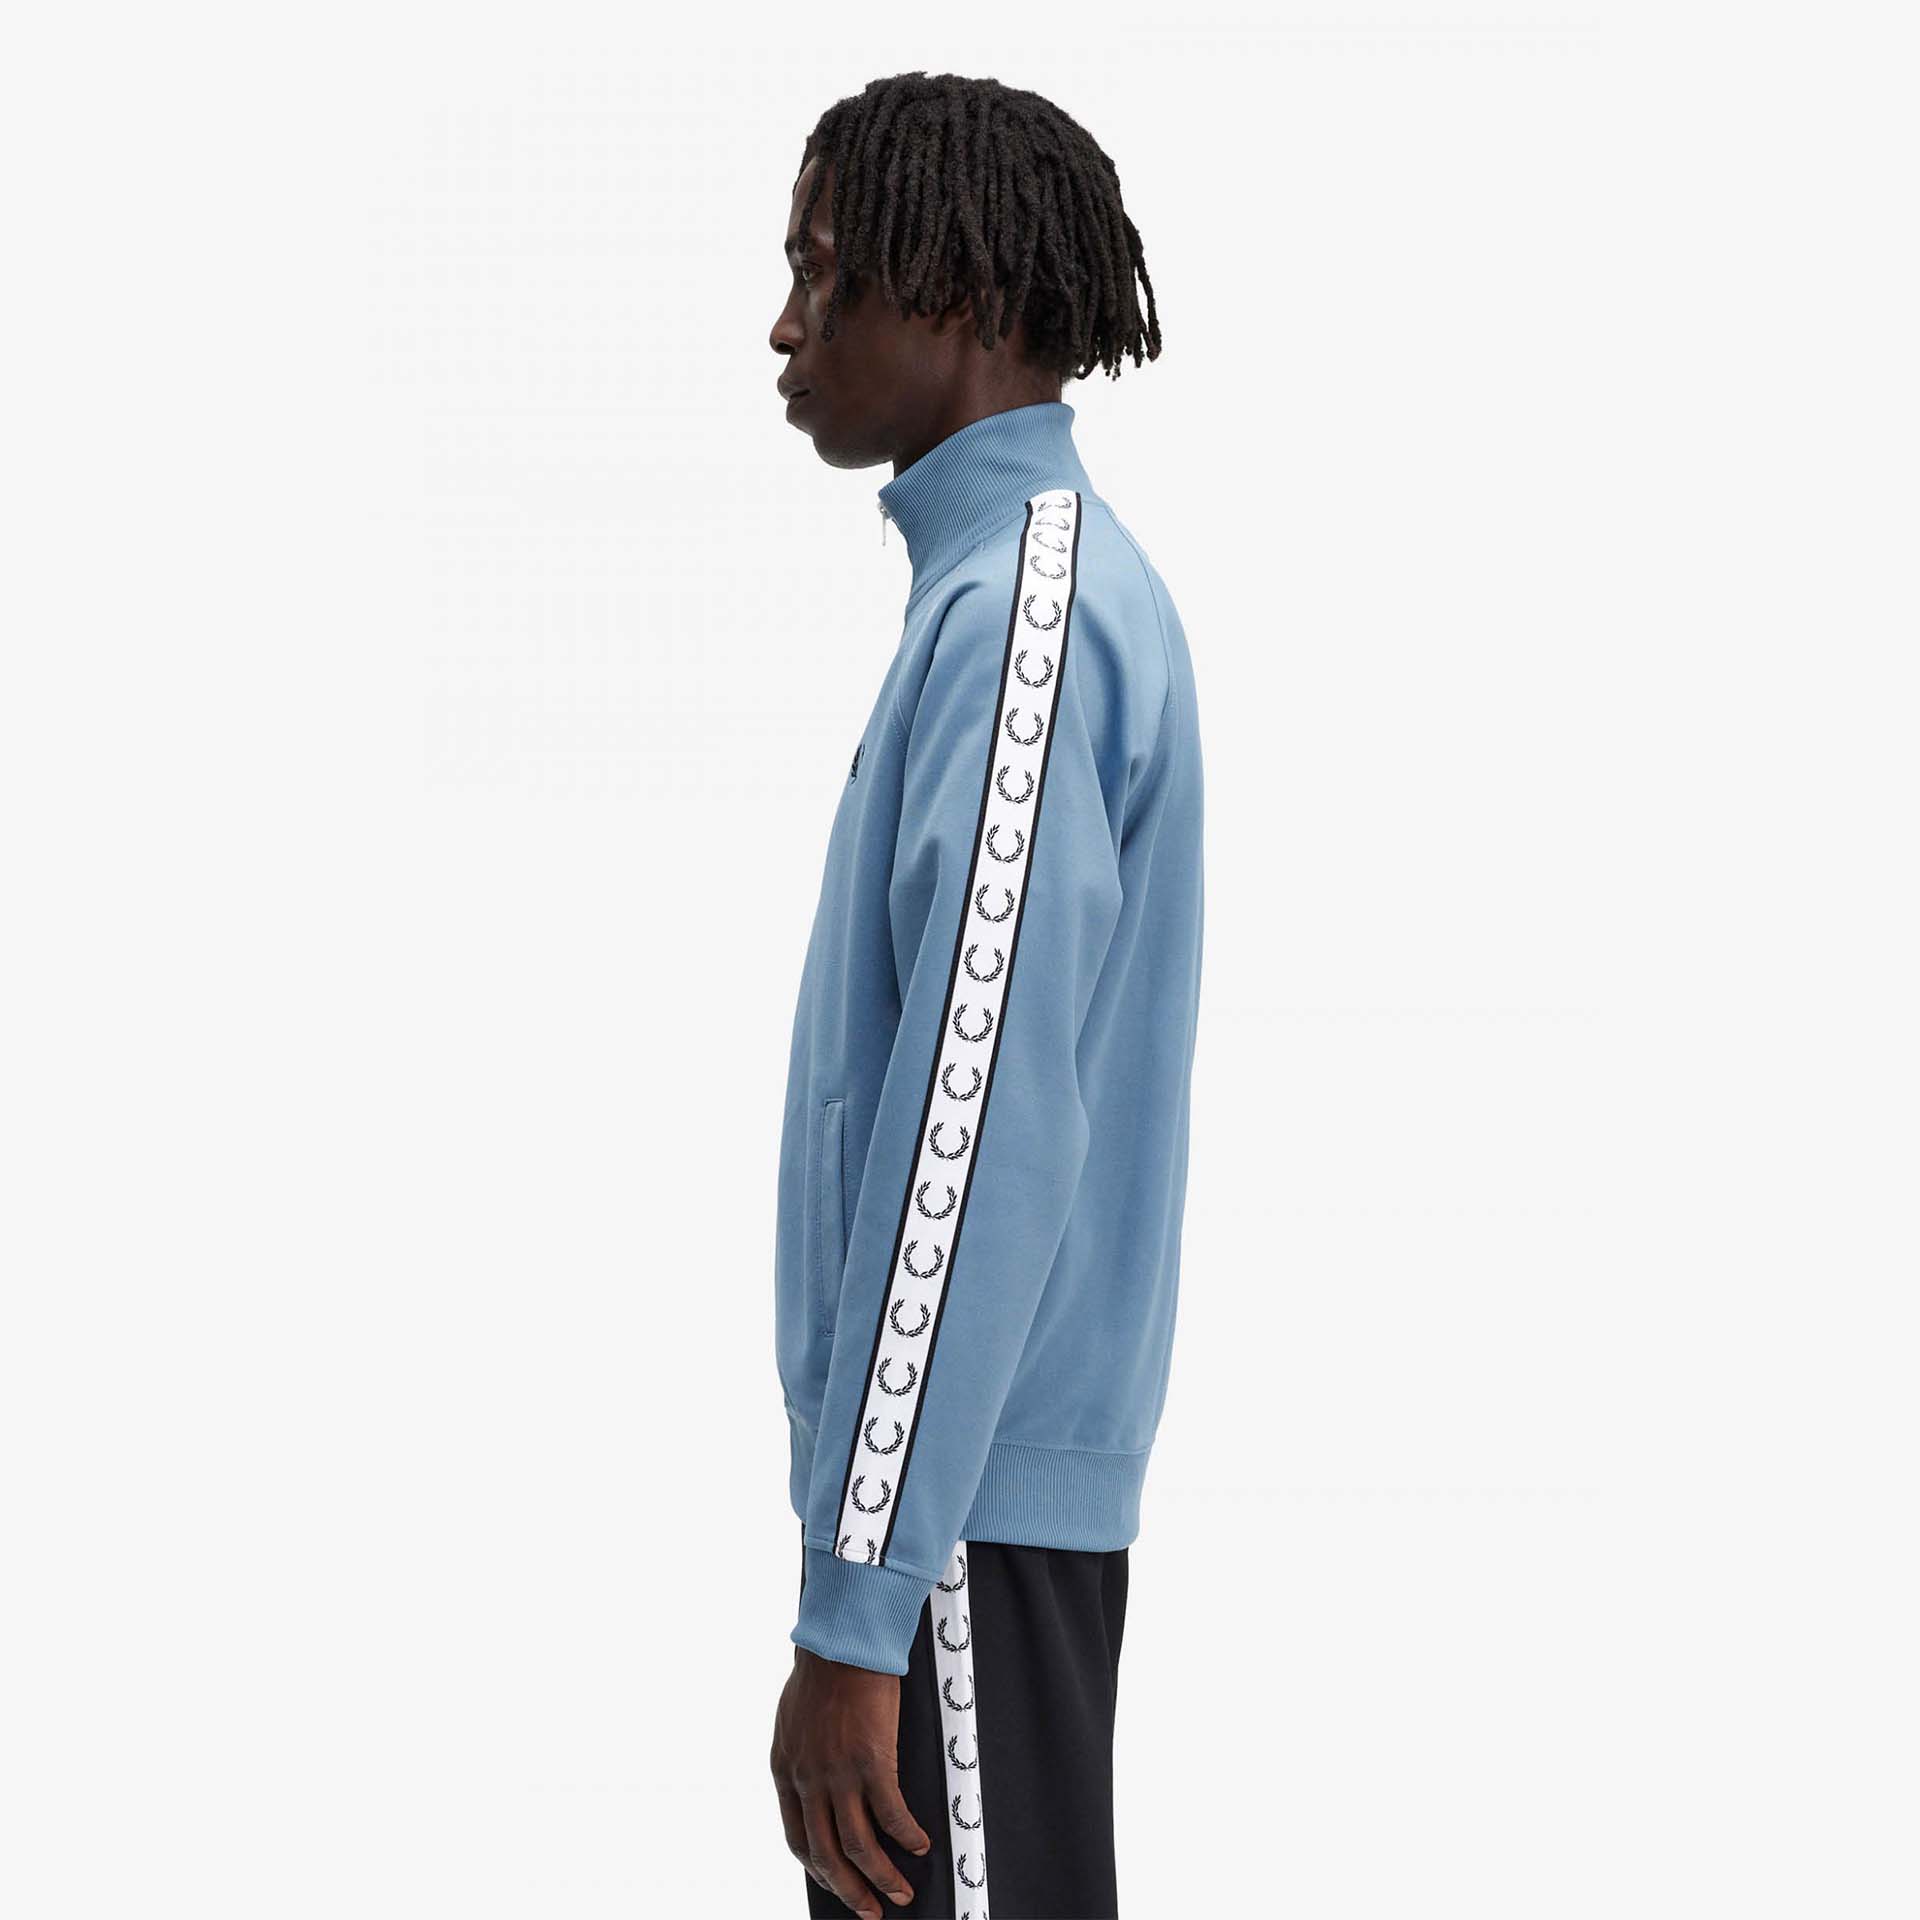 Fred Perry Taped Track Jacket Ash Blue